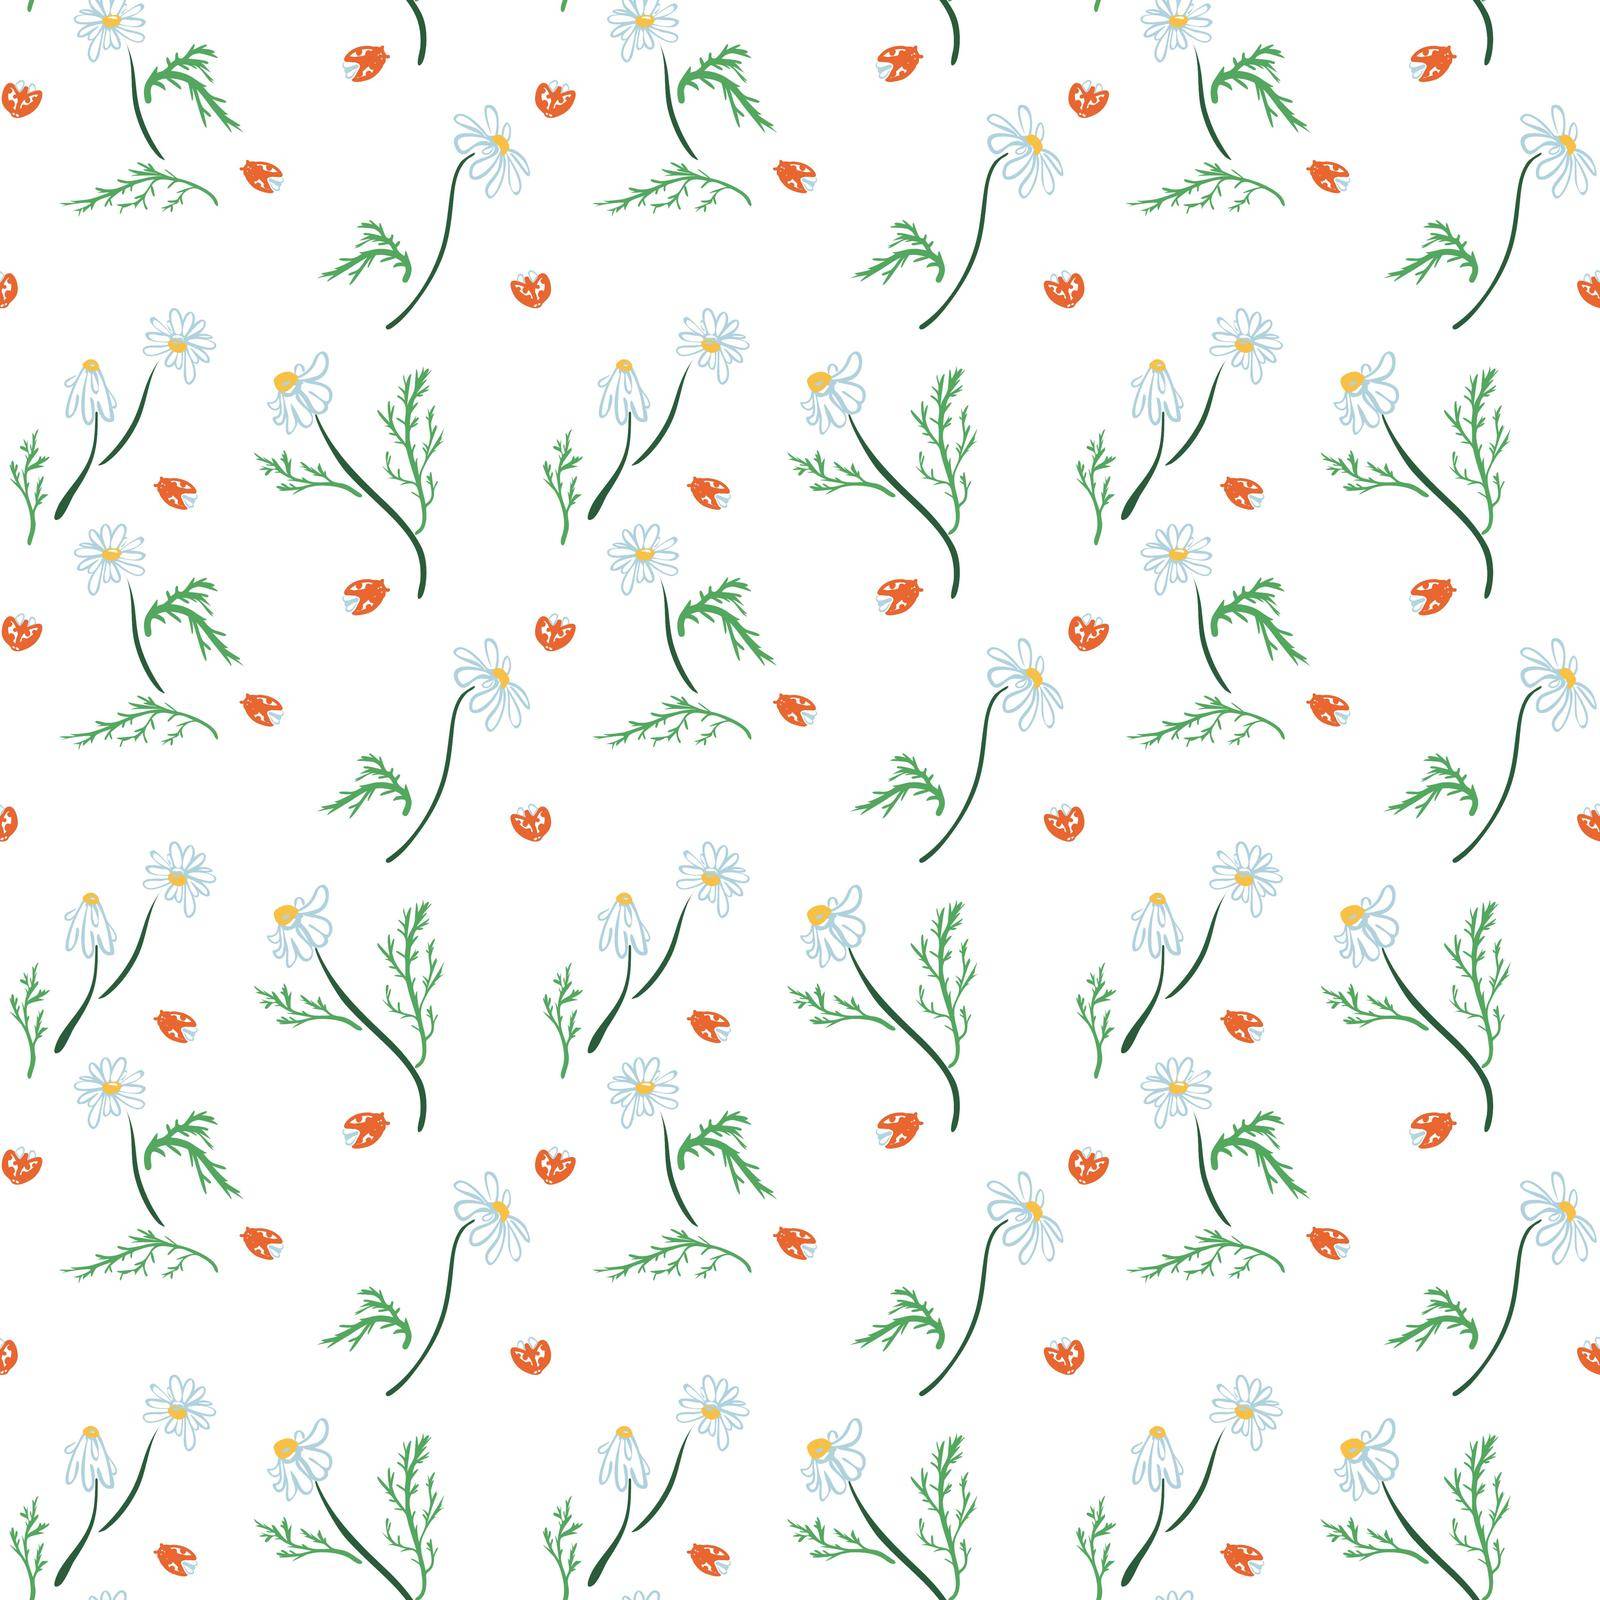 Seamless pattern with flowers, leaves, branches. Vector colorful endless floral background. The elegant illustration for fashion prints, fabric, scrapbook